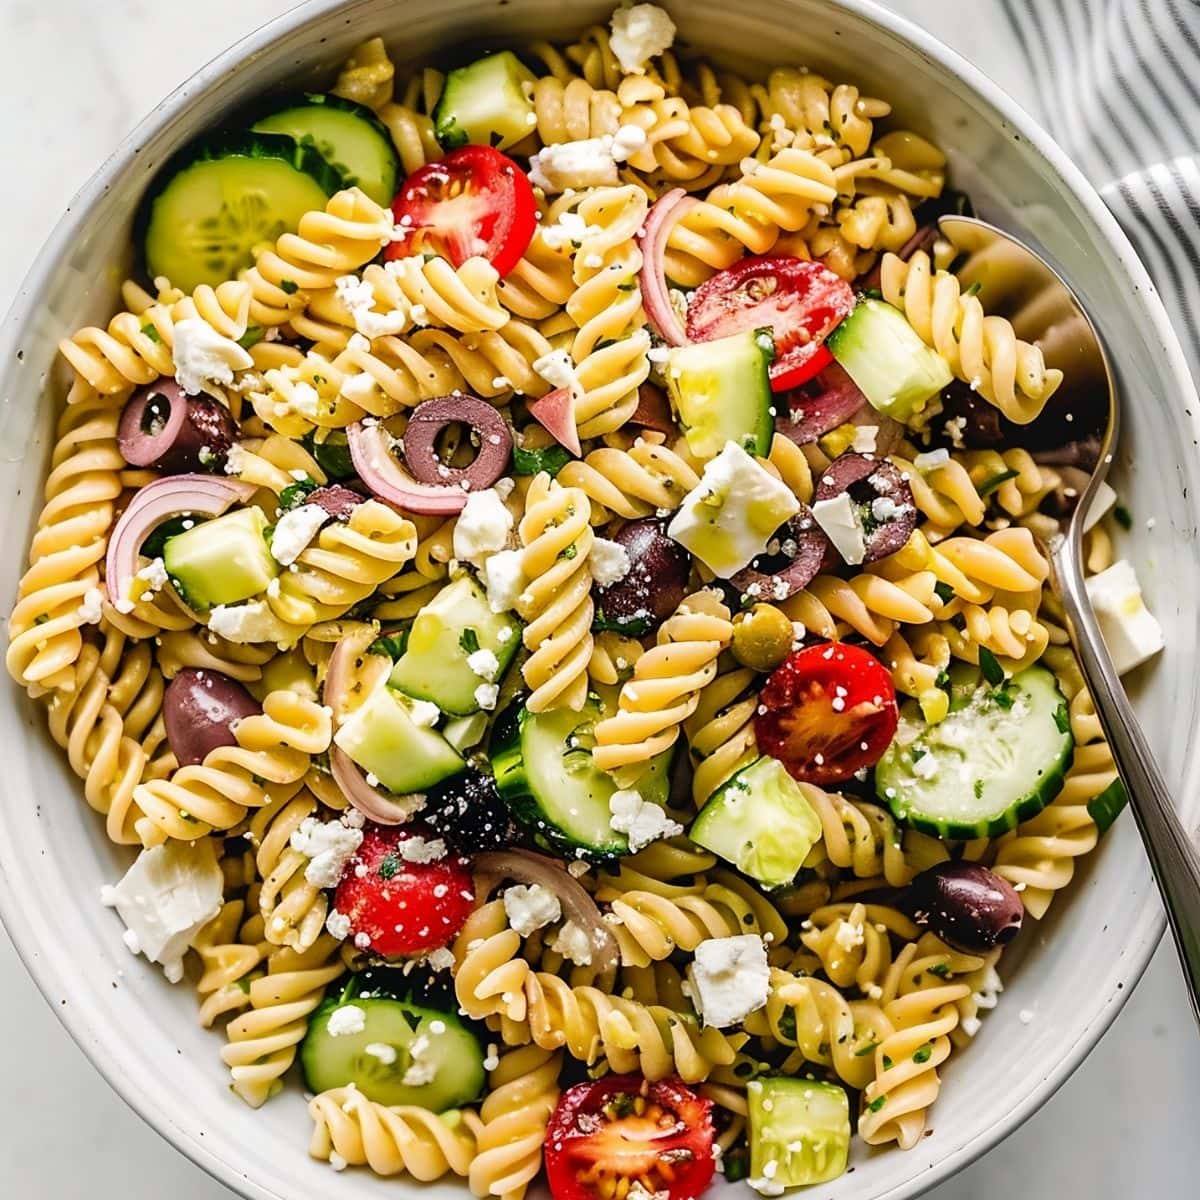 Top View of Bowl of Greek Pasta Salad with Olives, Red Onions, Cucumber Slices, Tomatoes, Feta, and Herbs with a Spoon 